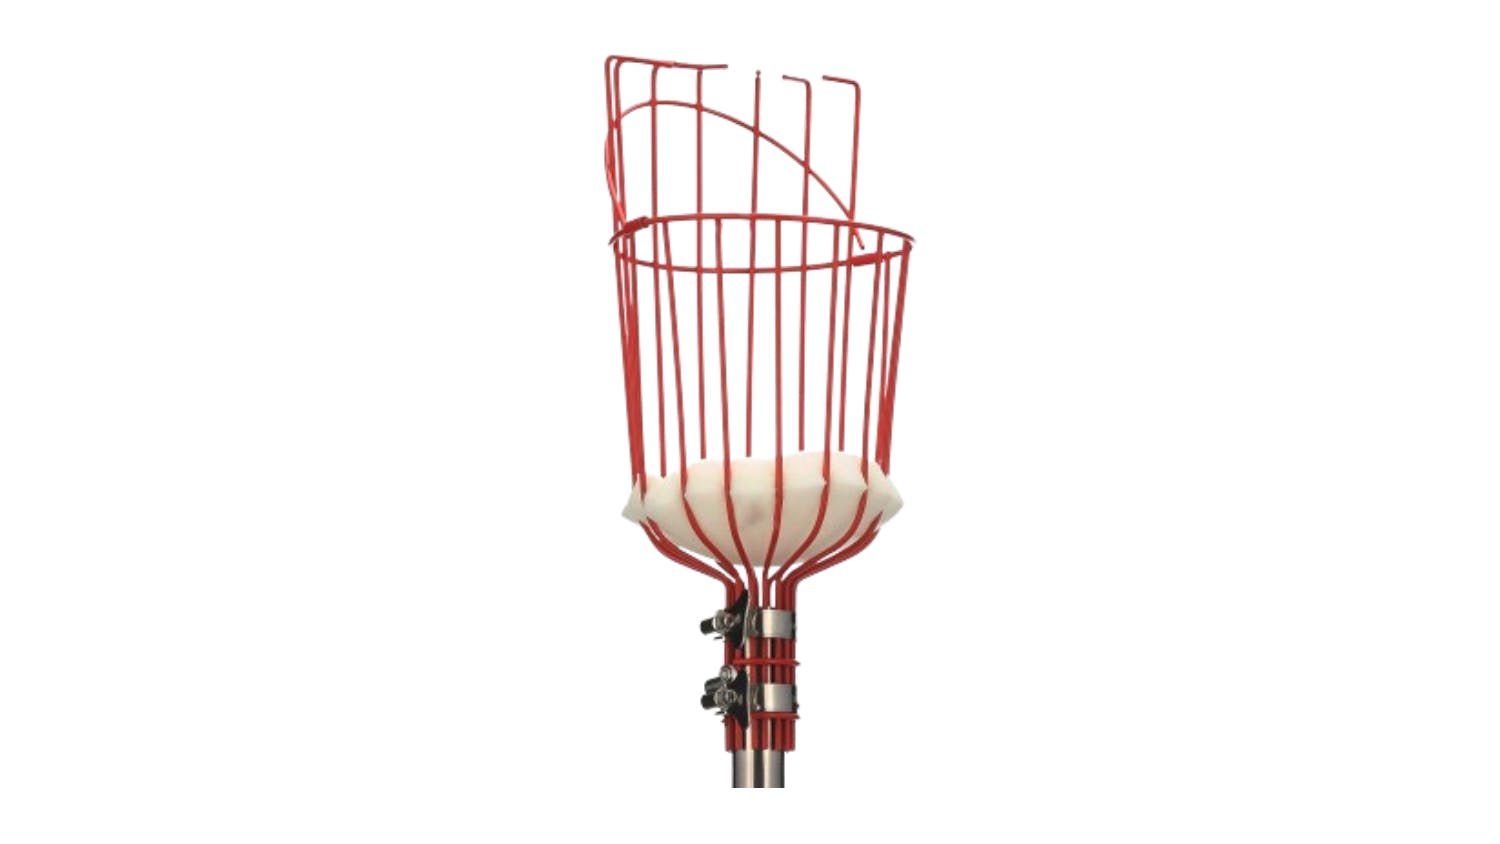 Kmall Telescopic Fruit Picker with Catching Basket